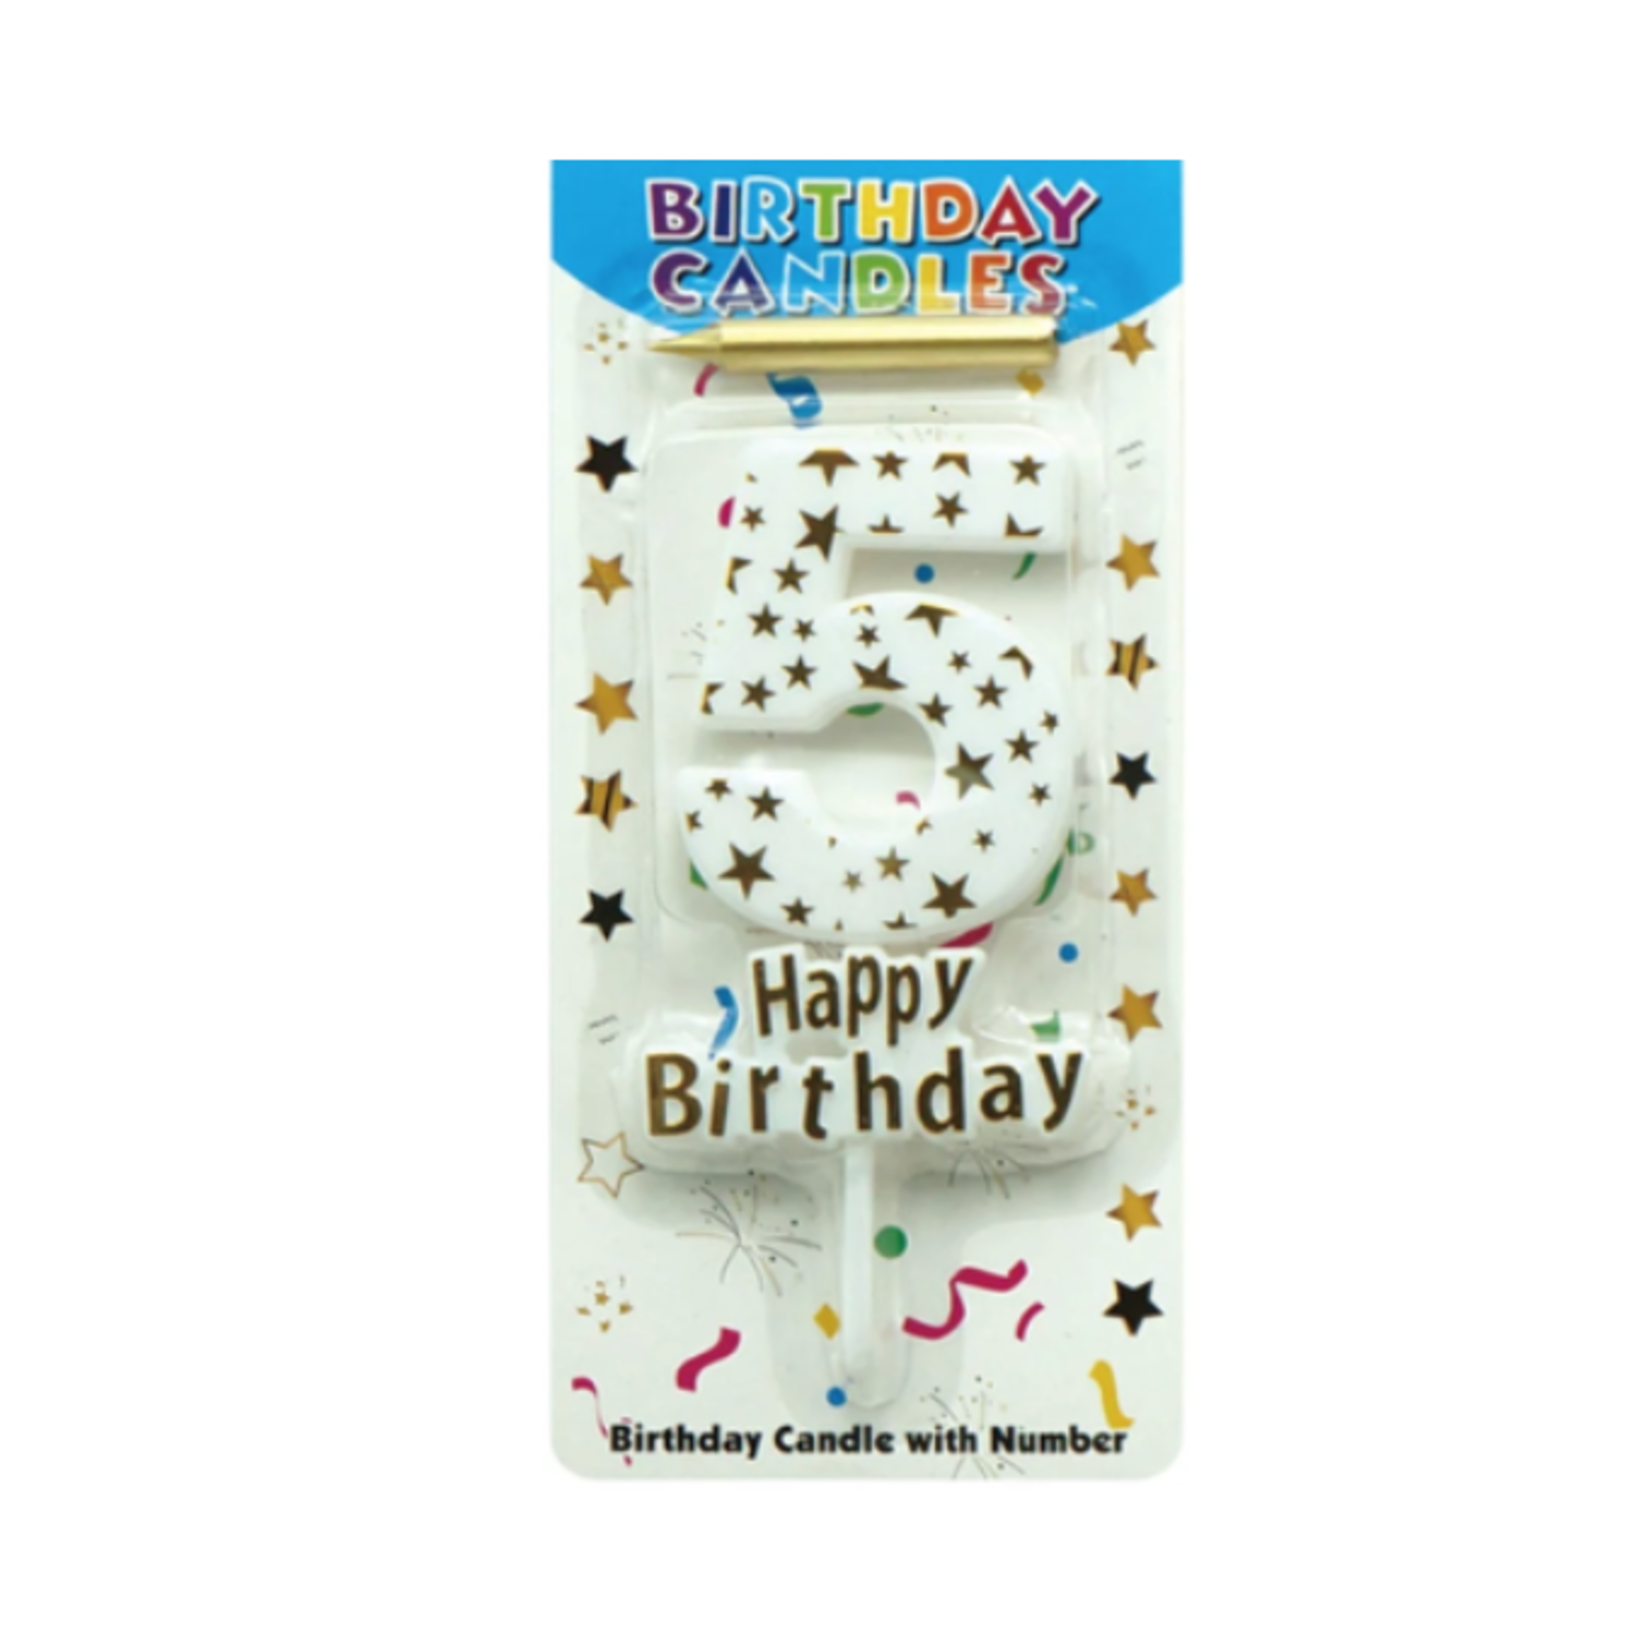 HAPPY BIRTHDAY CANDLE #5 WHITE WITH GOLD STARS